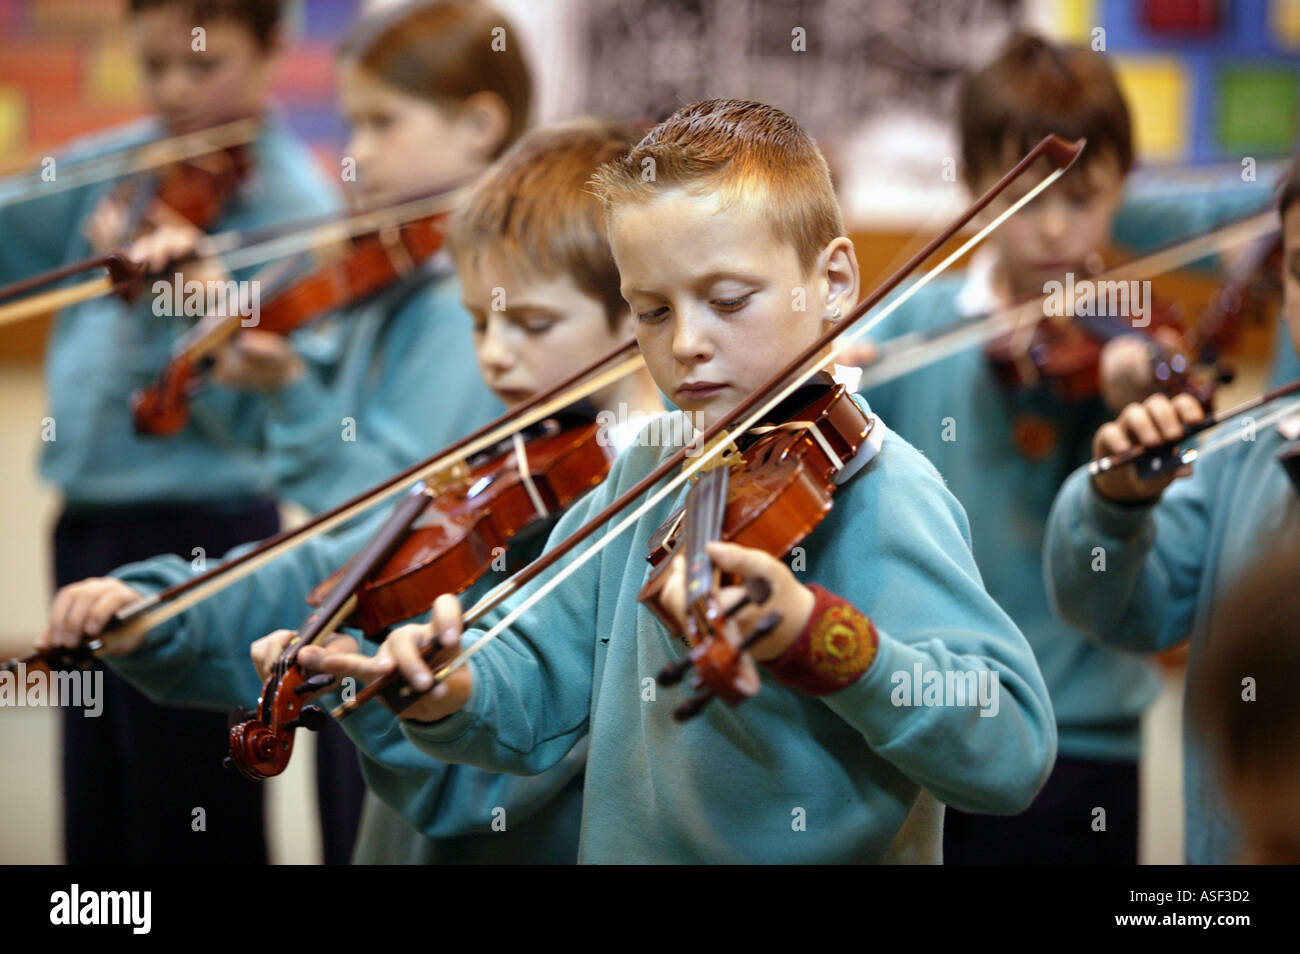 Violin lessons for year 4 pupils at St Lawrence primary school in Ludlow Shropshire UK April 2004 Stock Photo